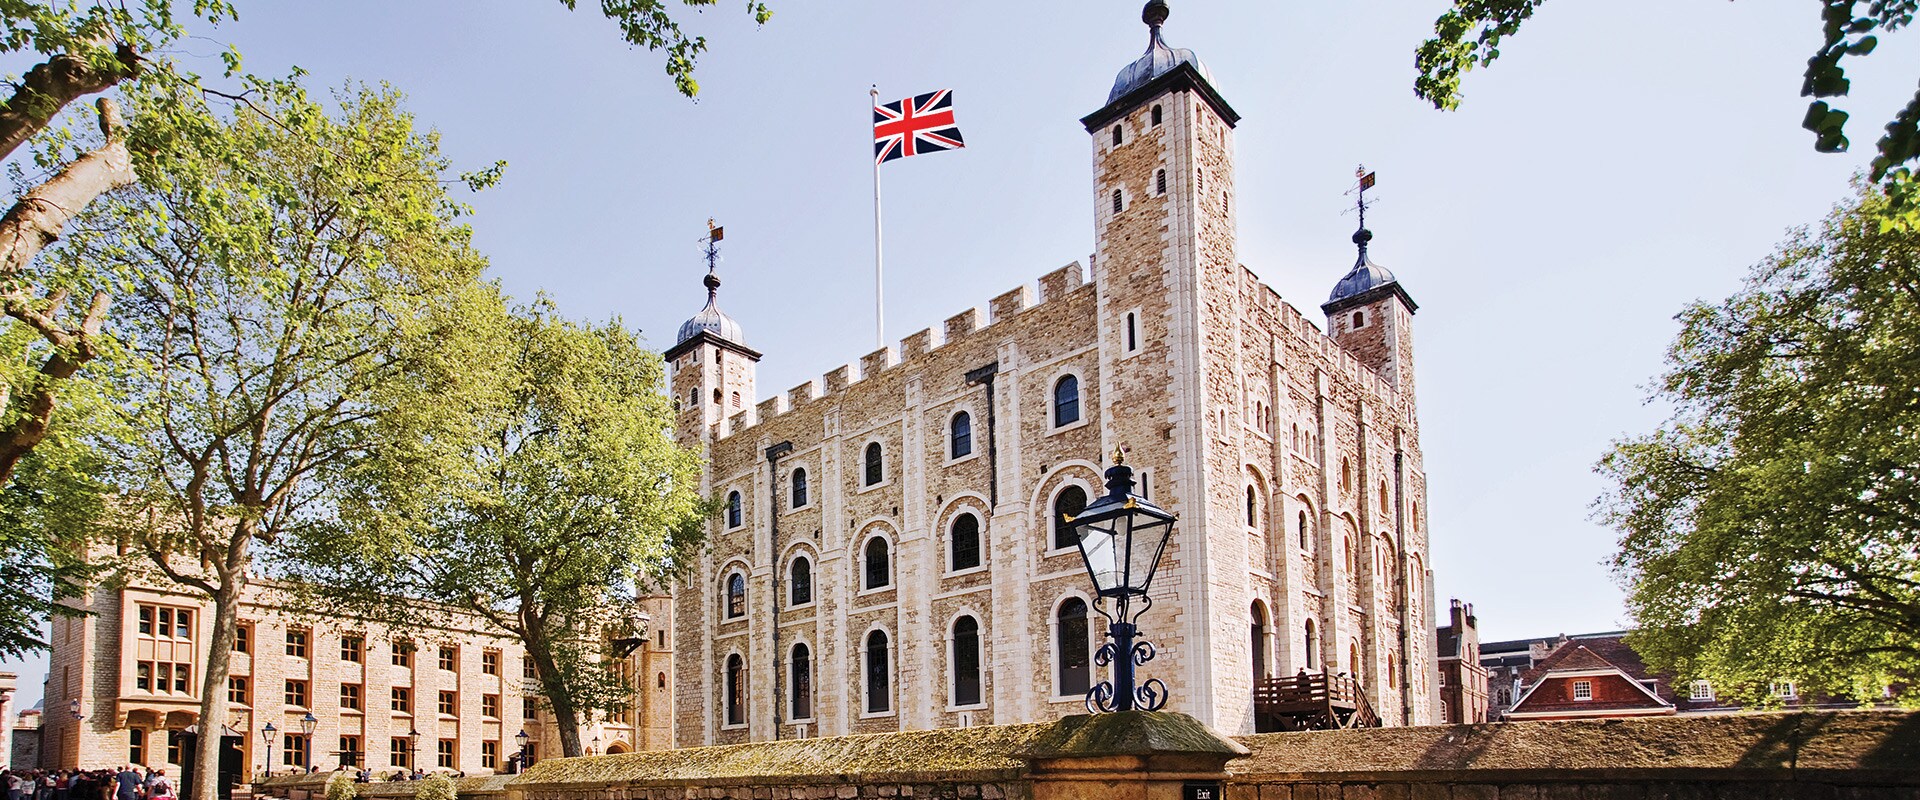 Tower of London with flag flying in the wind.